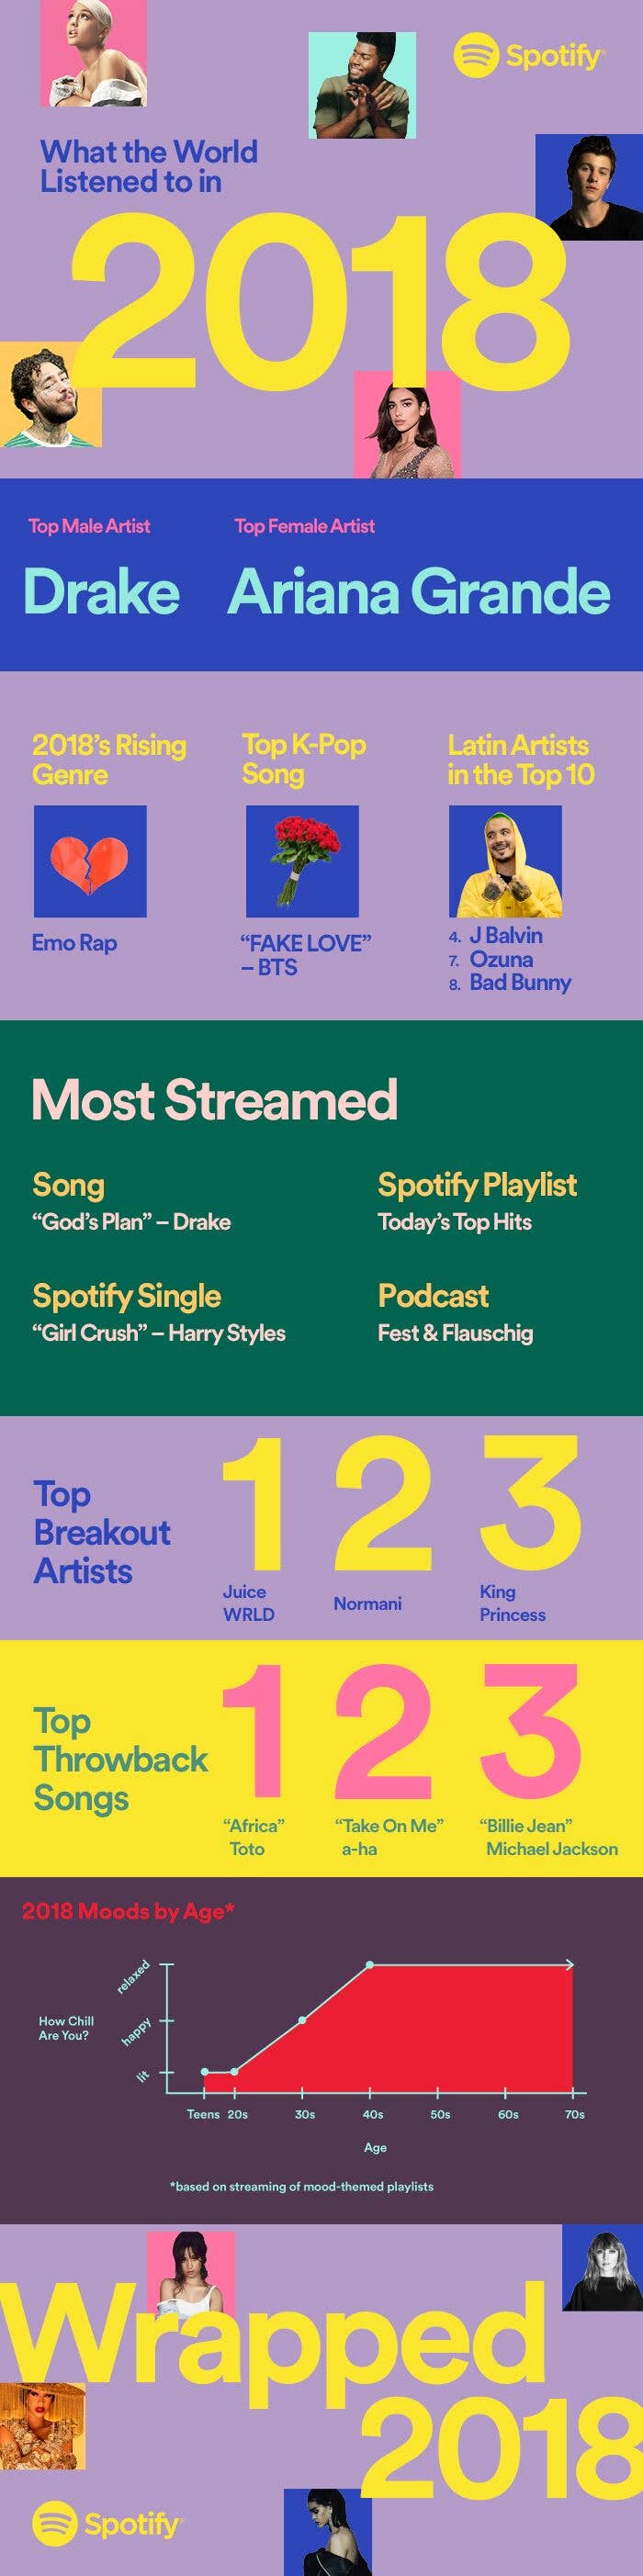 Spotify &quot;Wrapped&quot; 2018